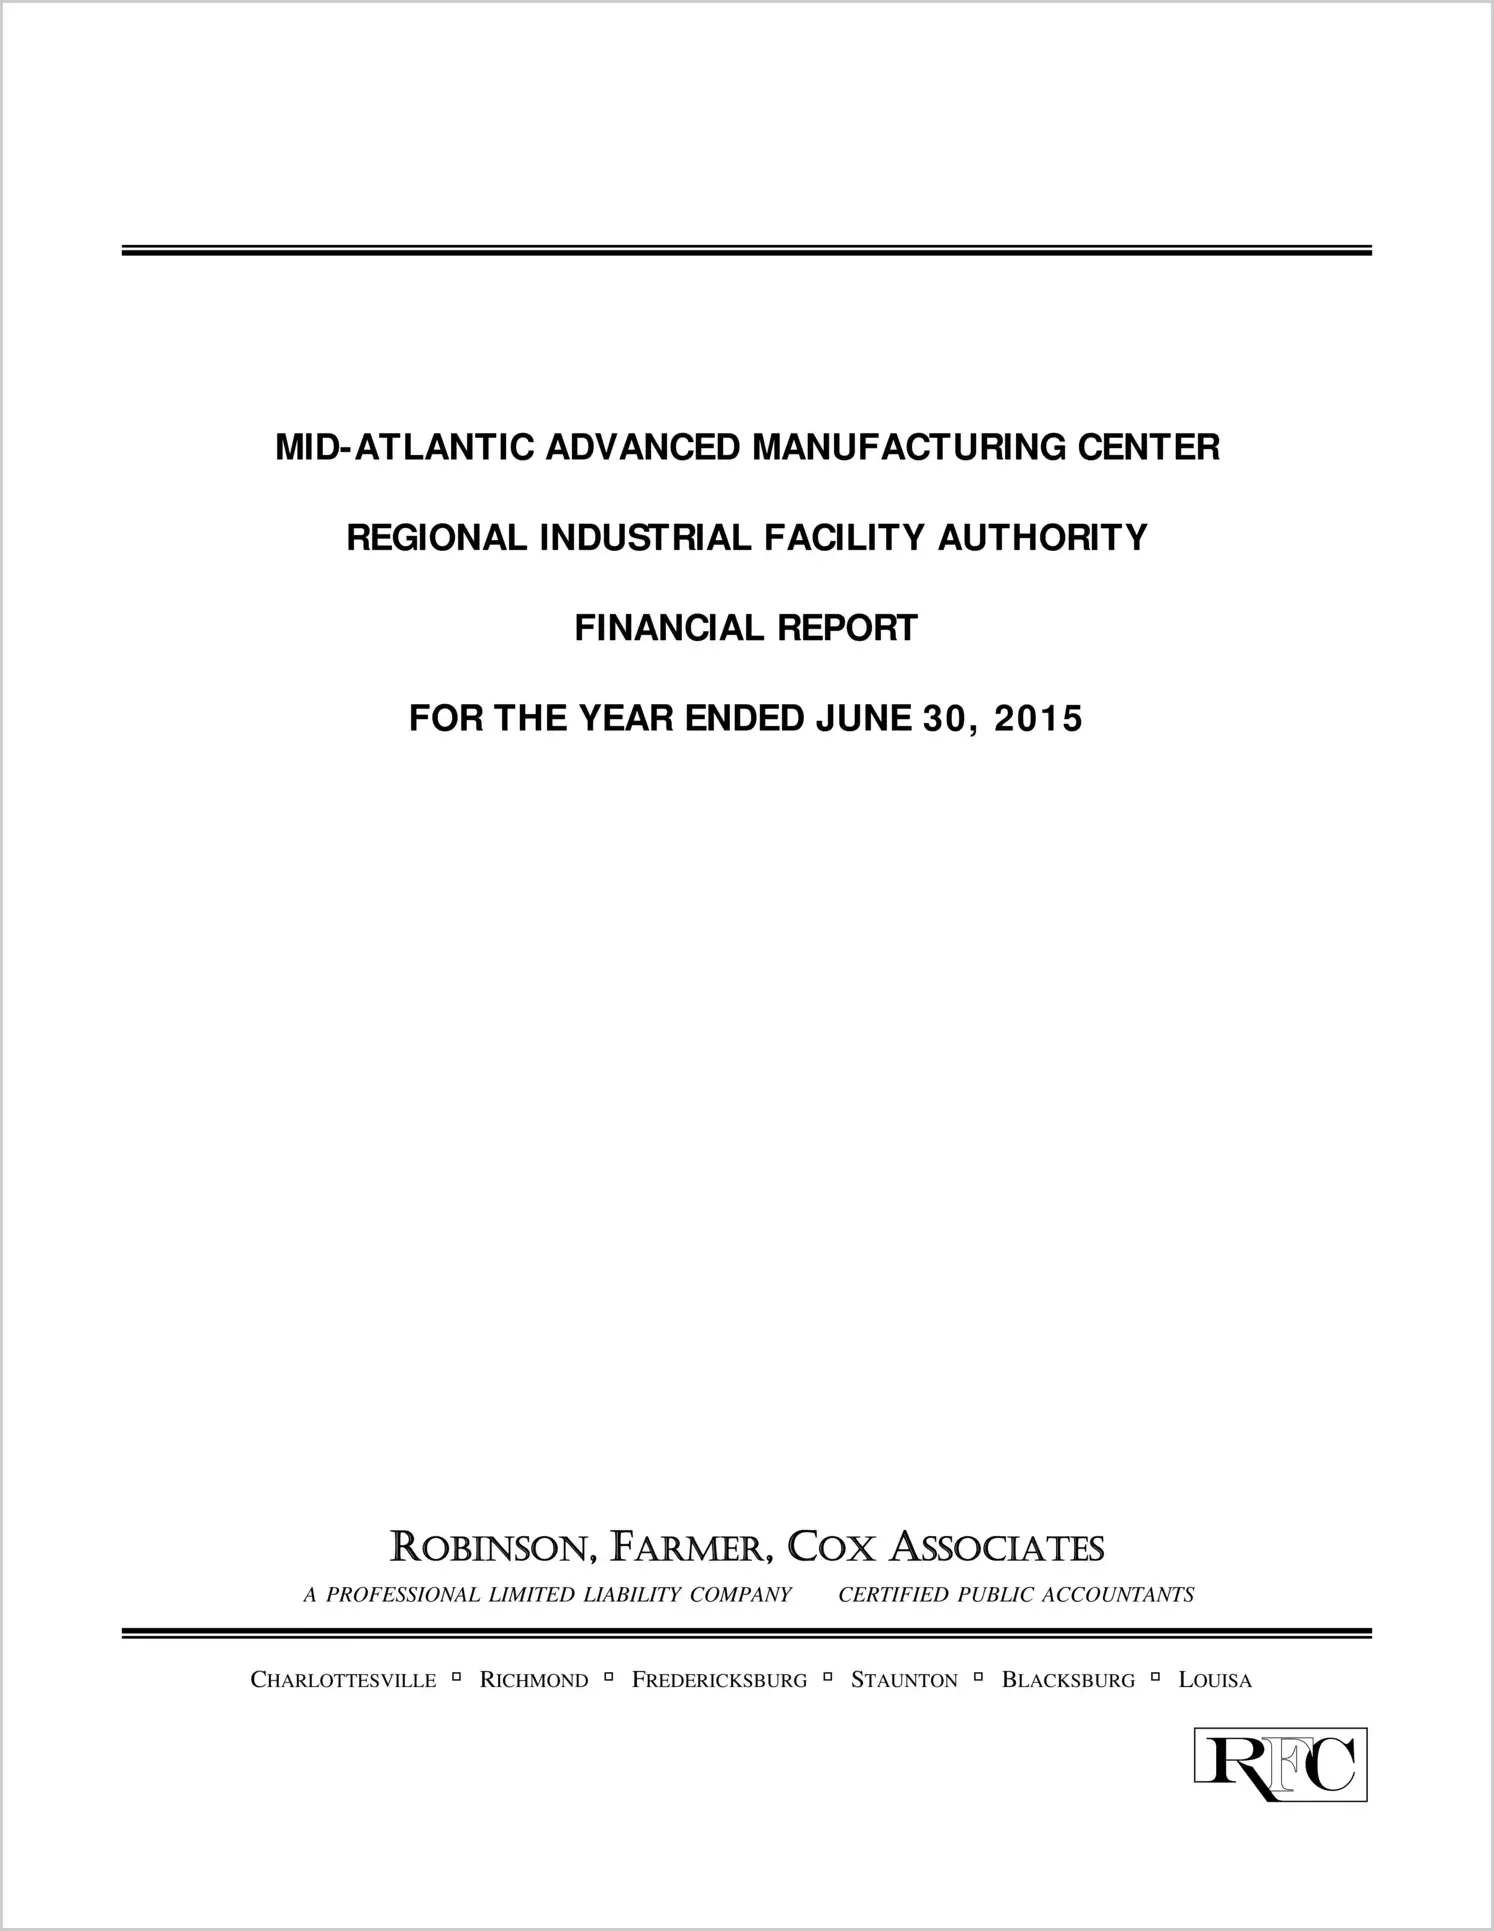 2015 ABC/Other Annual Financial Report  for Mid-Atlantic Advanced Manufacturing Center Regional Industrial Facility Authority